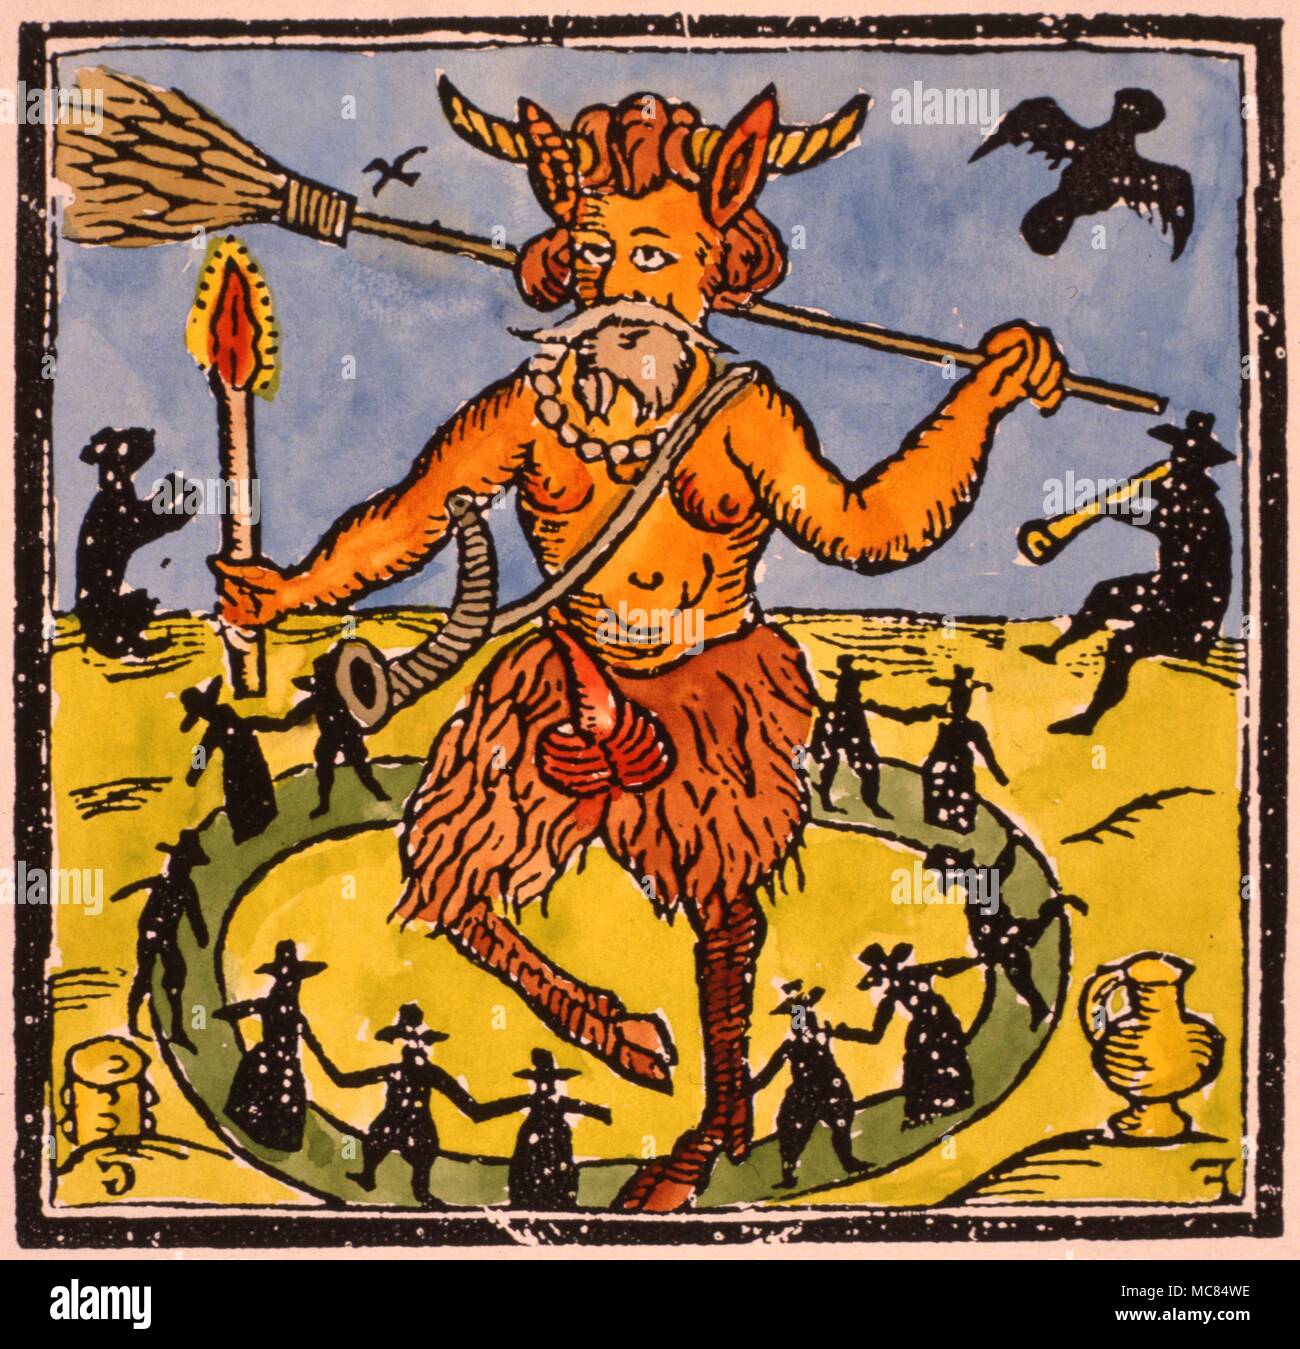 a pan like devil dancing with other dimunitive demons and their minion witches to the sound of pipe music the demon carries a candle horn and broomstick the latter probably symbolic of is power https www alamy com a pan like devil dancing with other dimunitive demons and their minion witches to the sound of pipe music the demon carries a candle horn and broomstick the latter probably symbolic of is power to transvect 17th century print image179659018 html